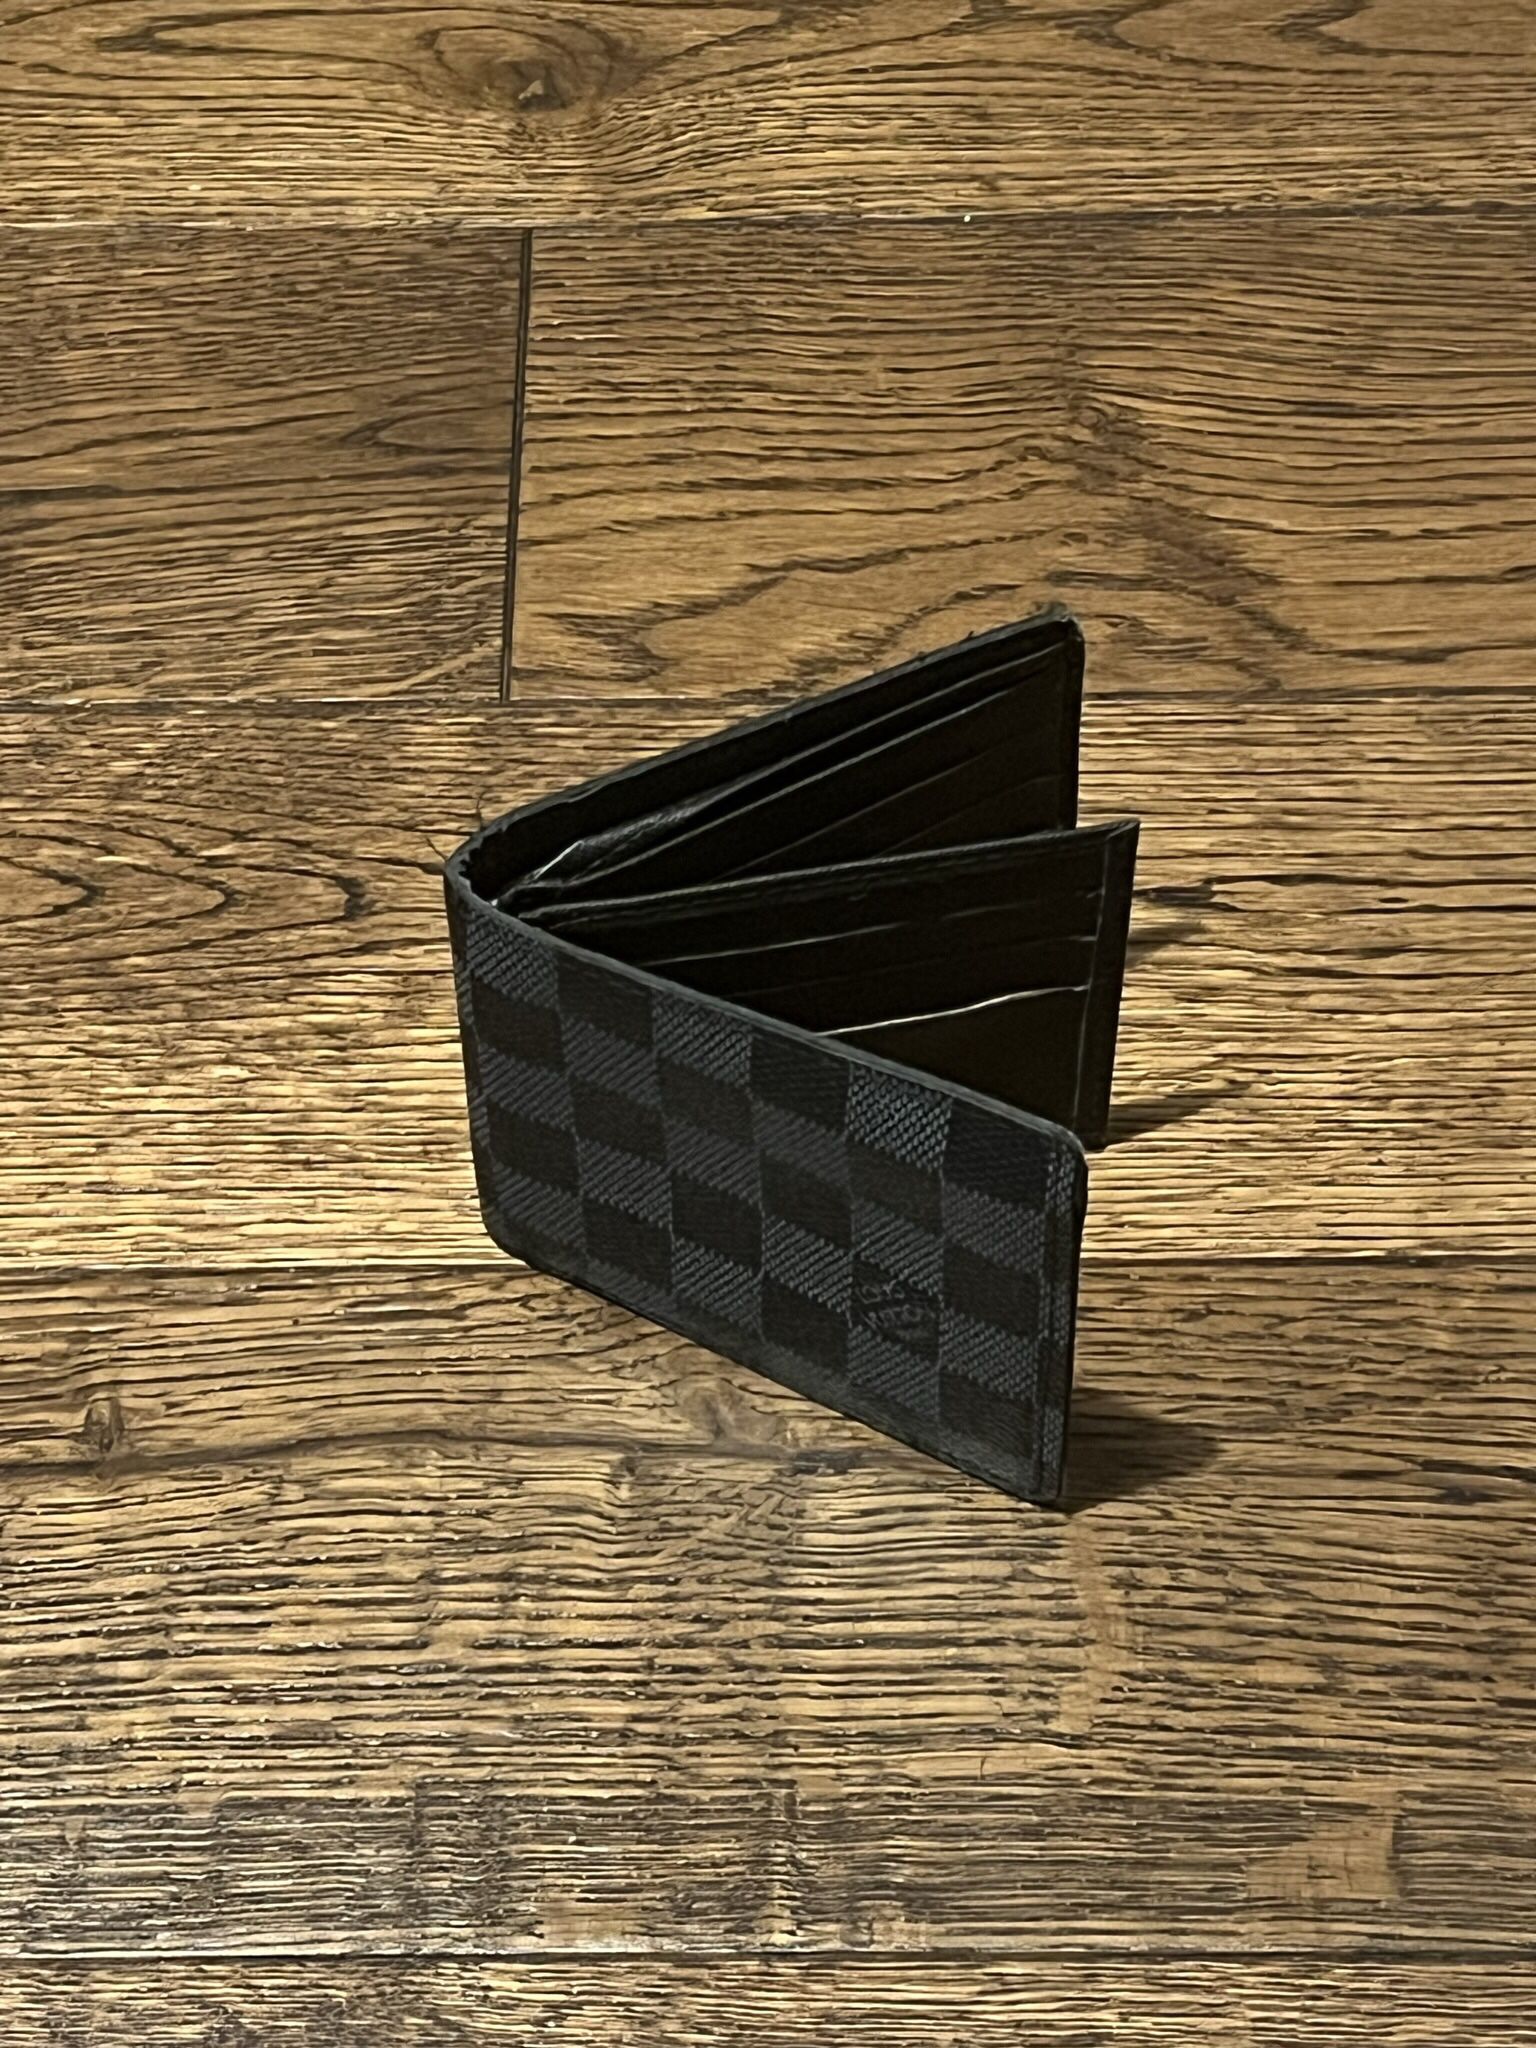 Used High Quality Louis Vuitton Wallet for Sale in Niles, IL - OfferUp